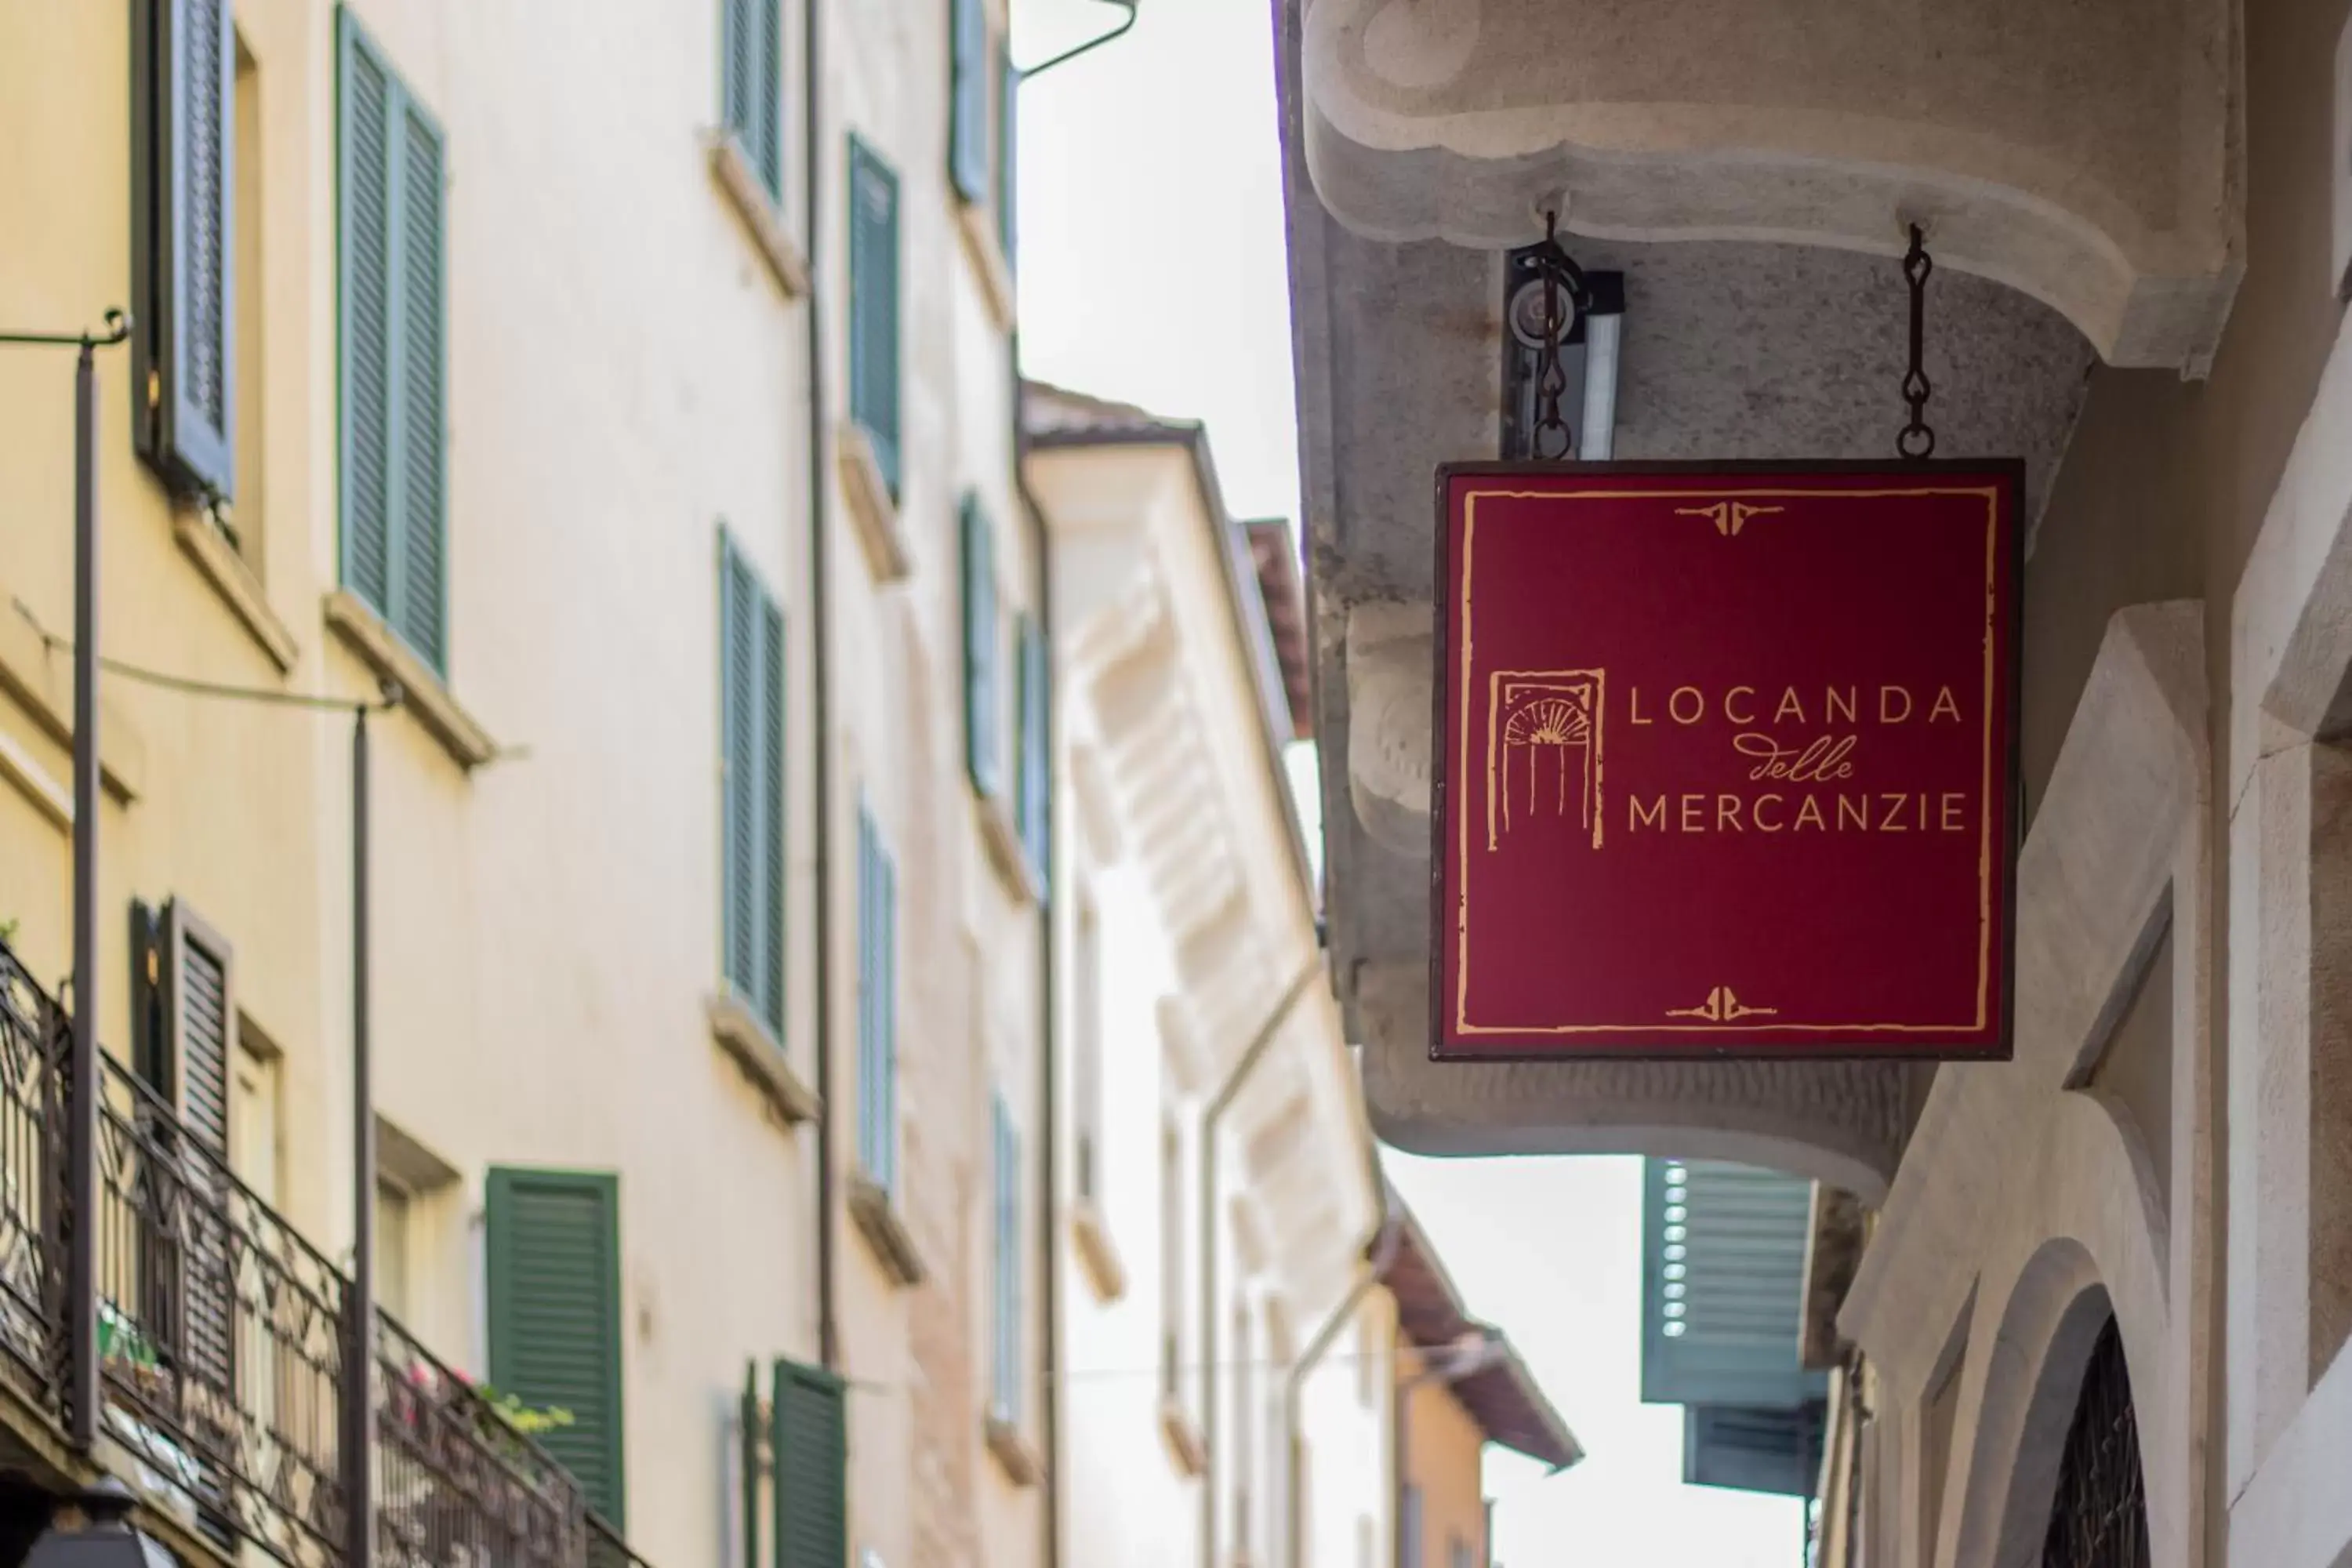 Property logo or sign in Locanda delle Mercanzie